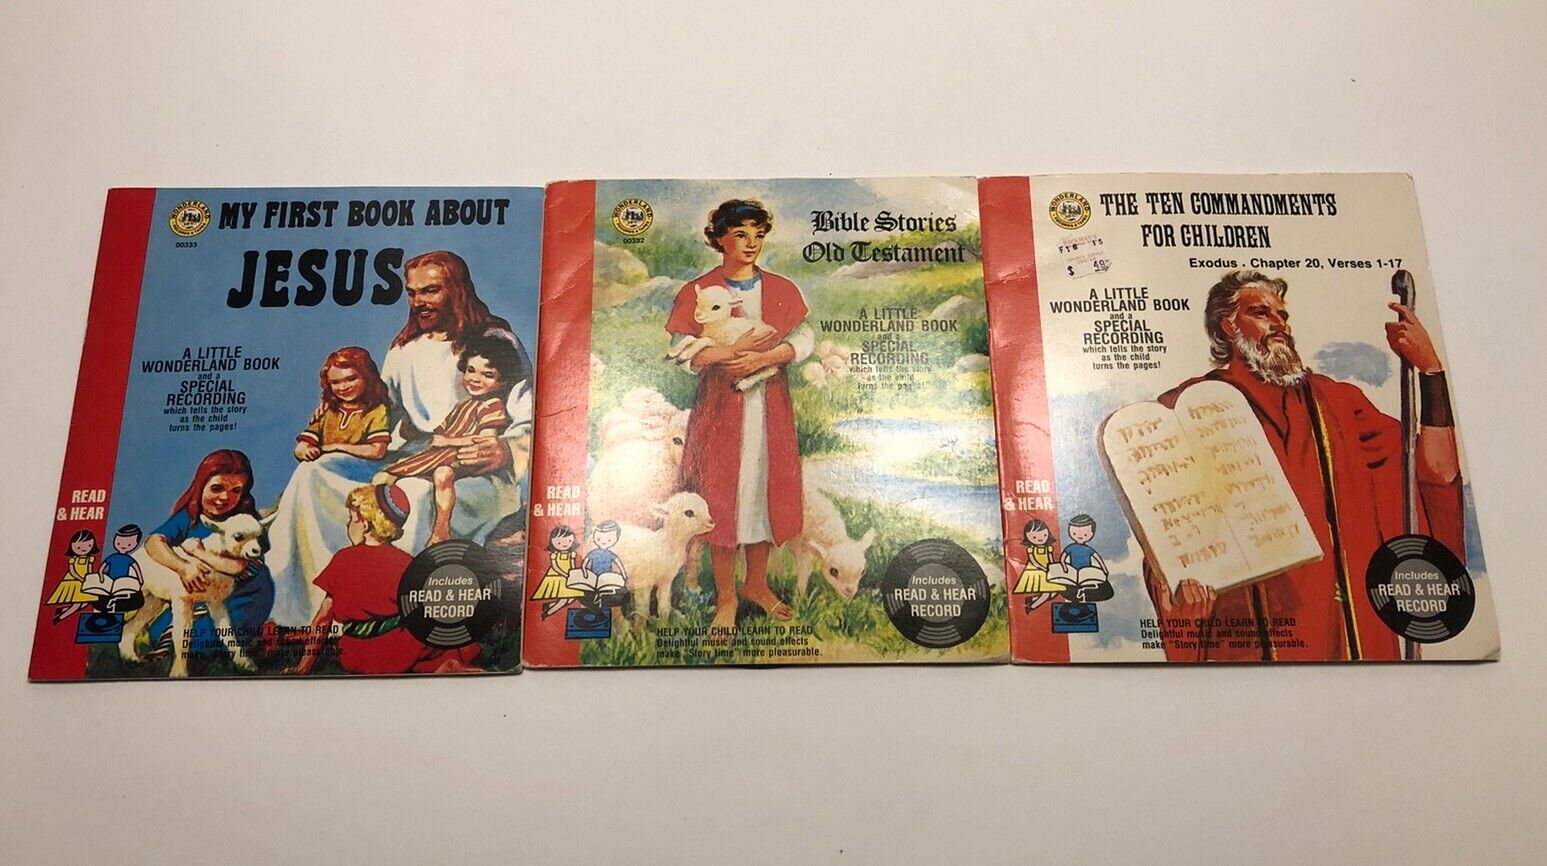 Lot of 3 - WONDERLAND Records & Tapes - Bible Stories - Record and book sets